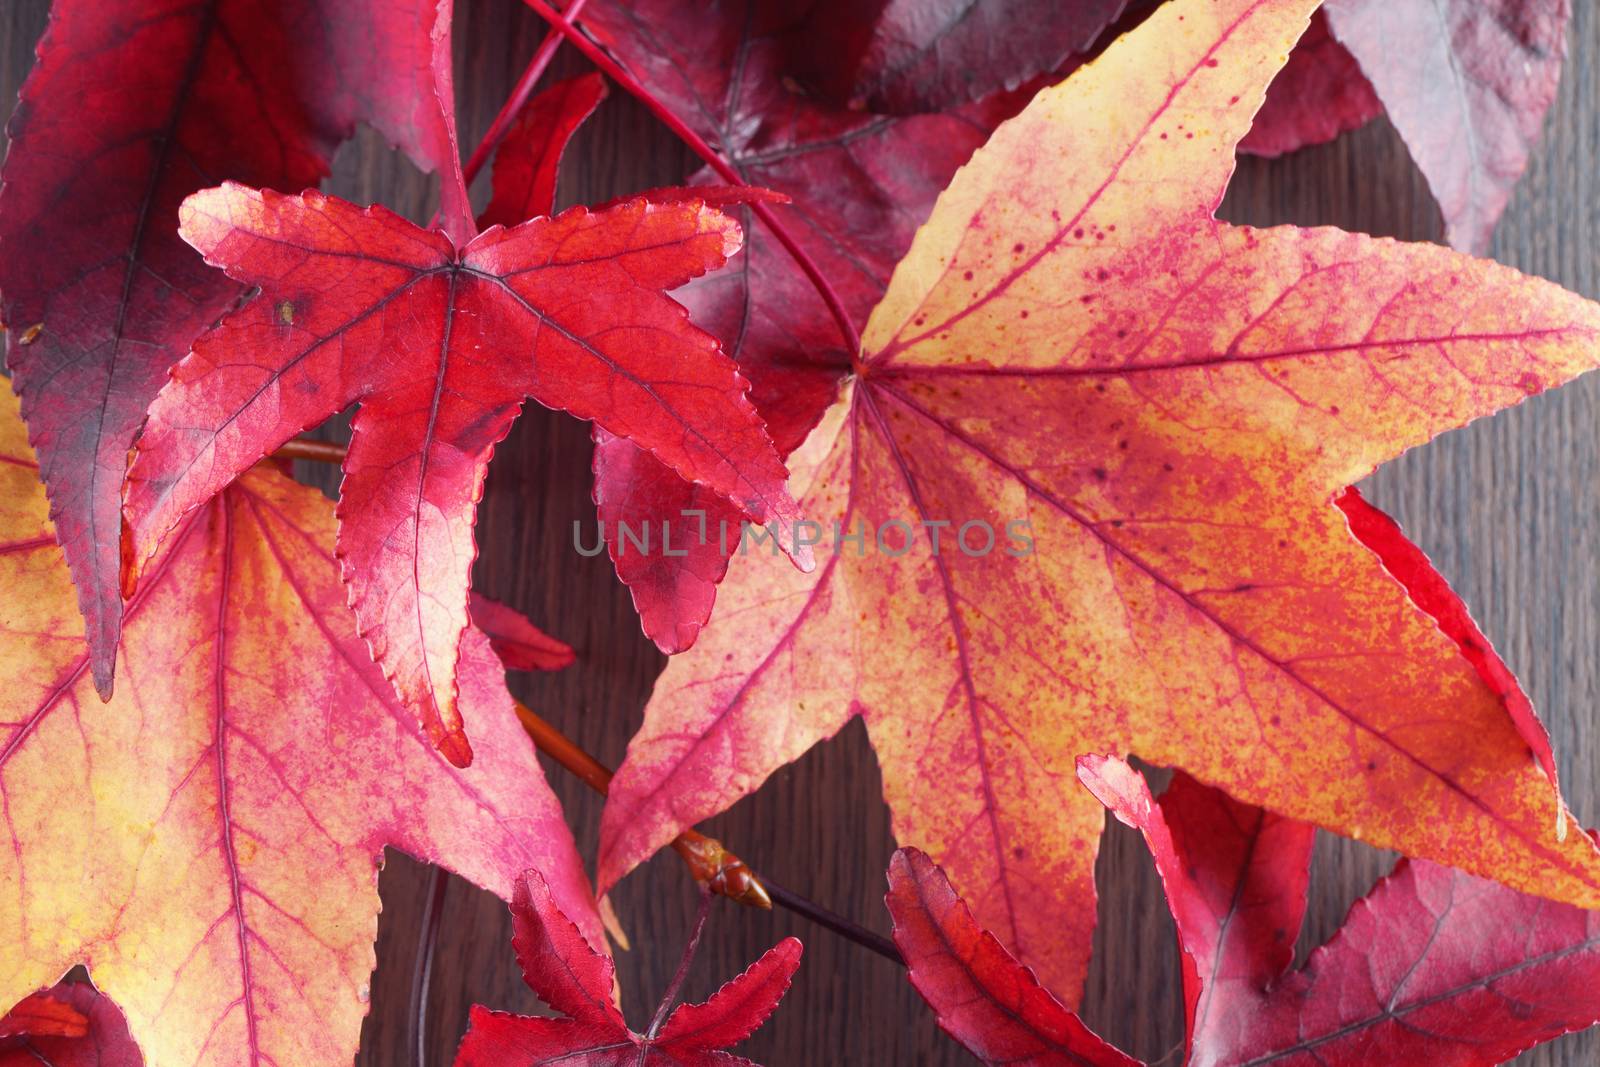 Red autumnal leaves over wooden background